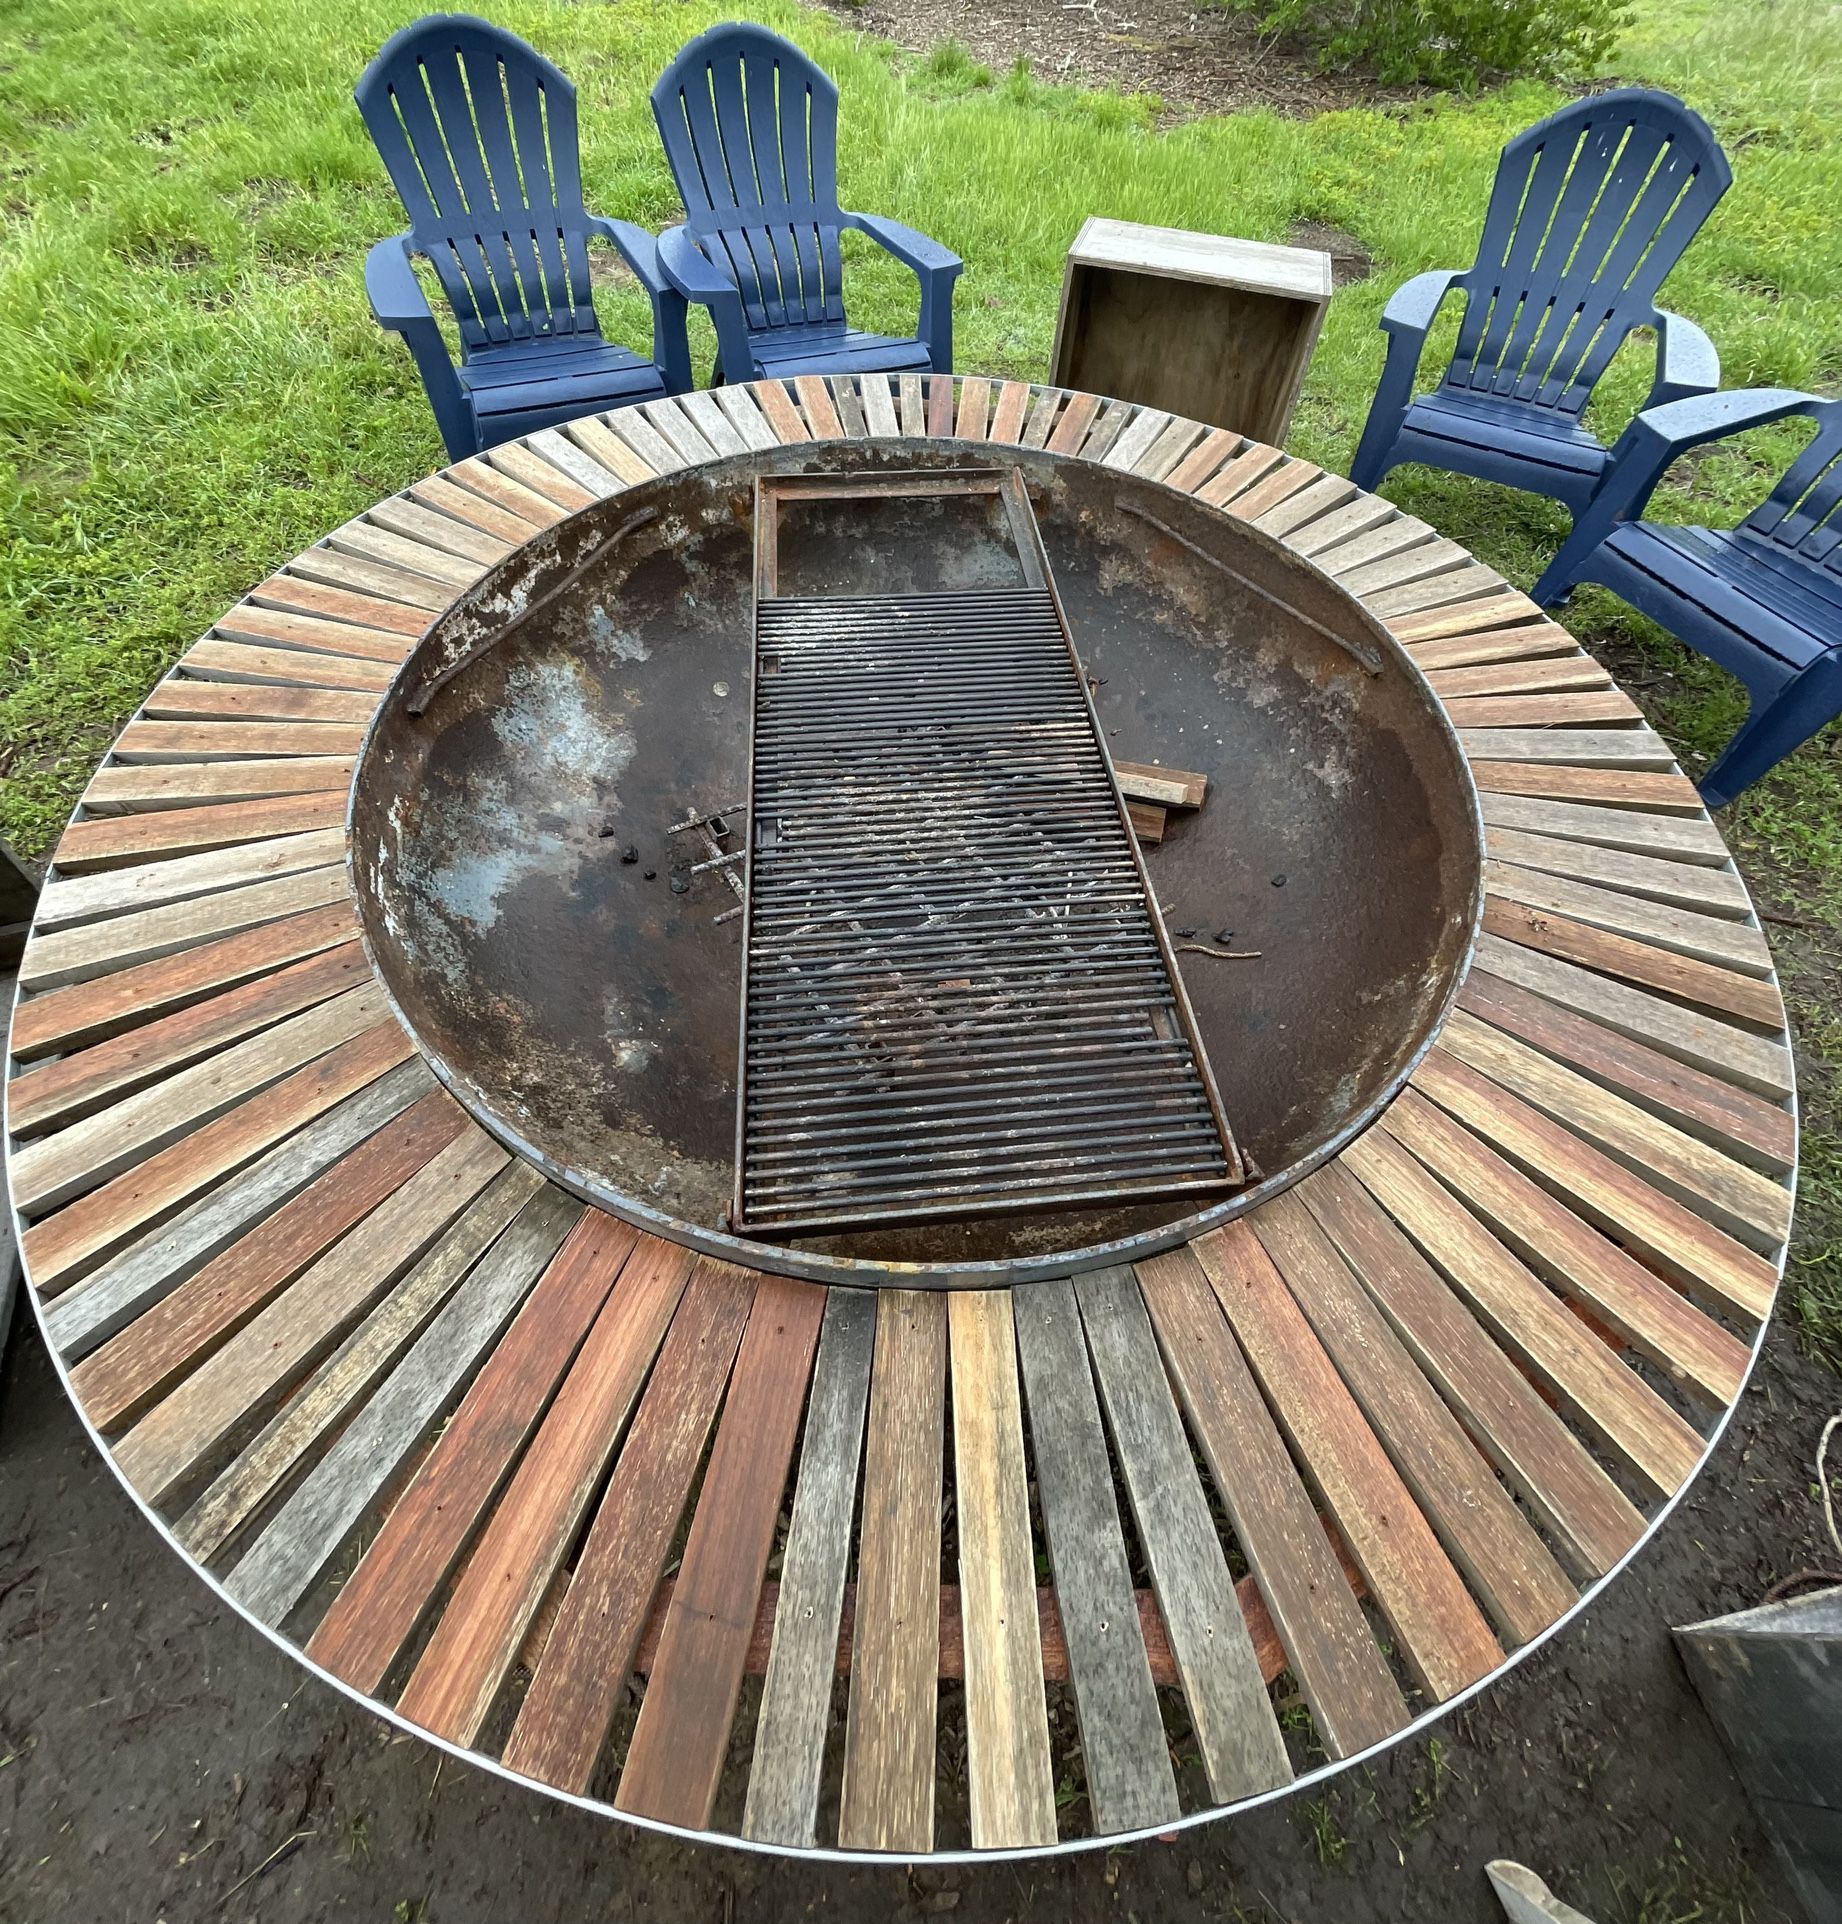 5’0 Fire Pit. Bbq Grill.  Give Me An Offer